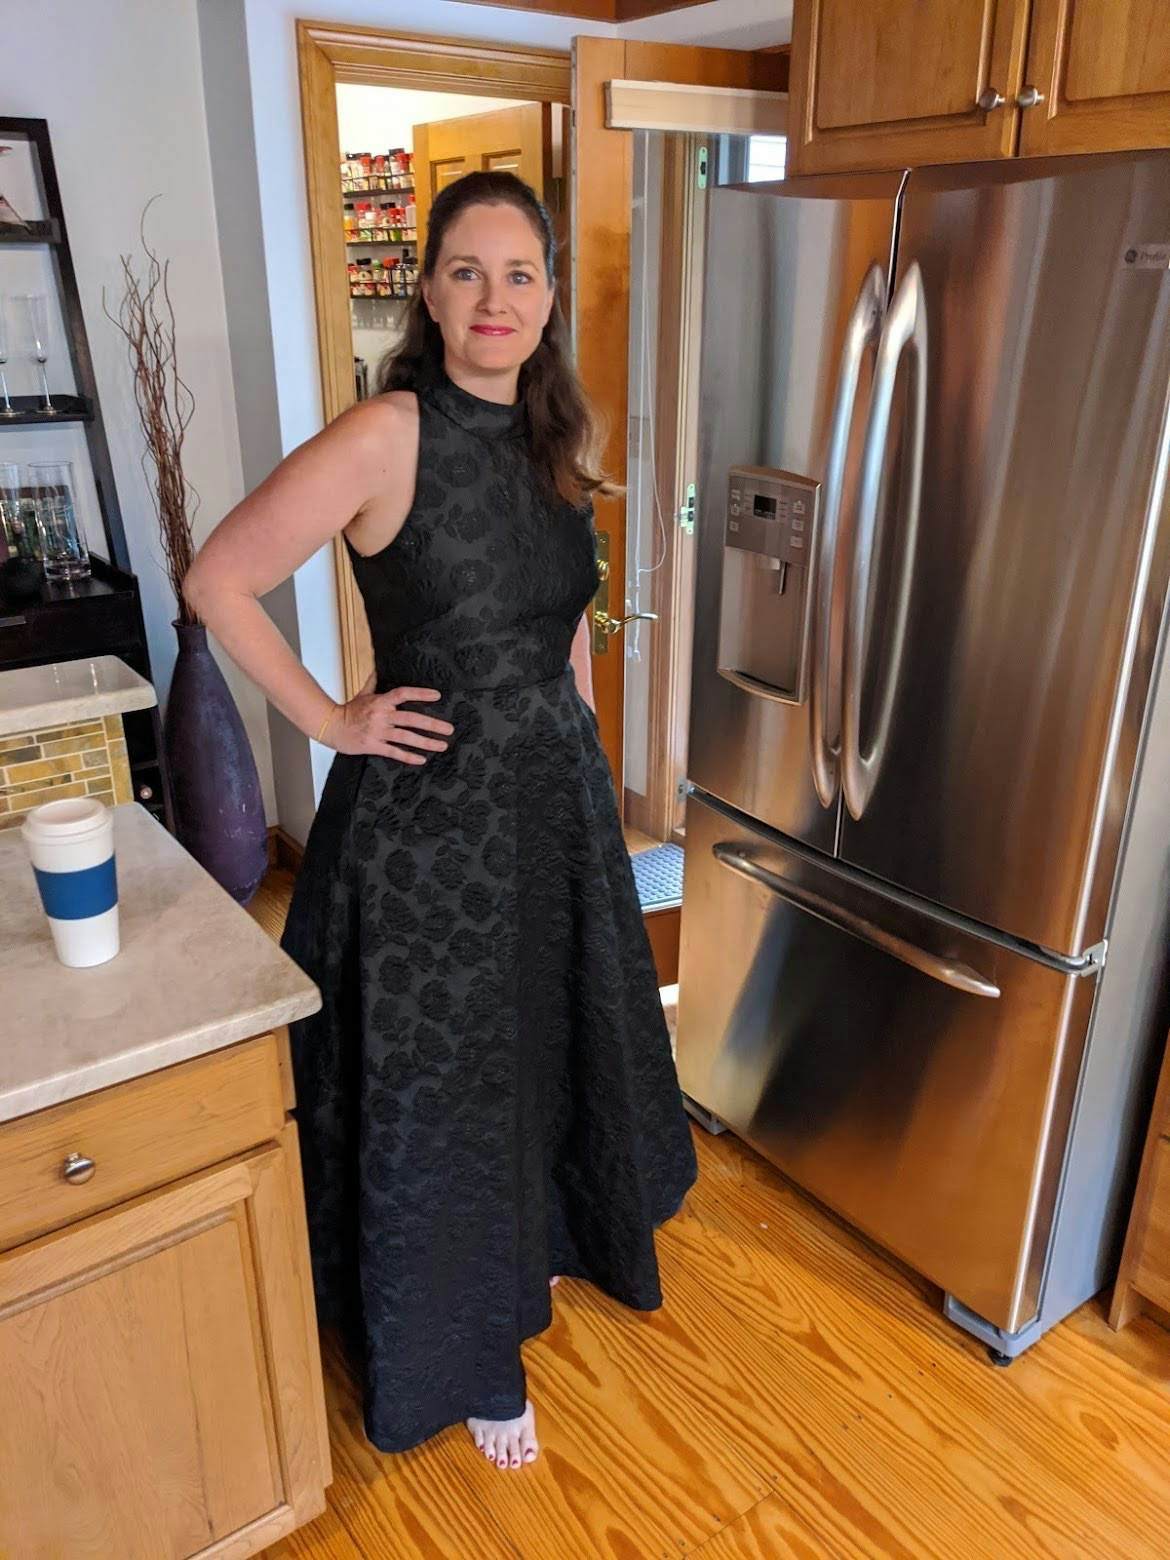 Woman works from home in a ballgown